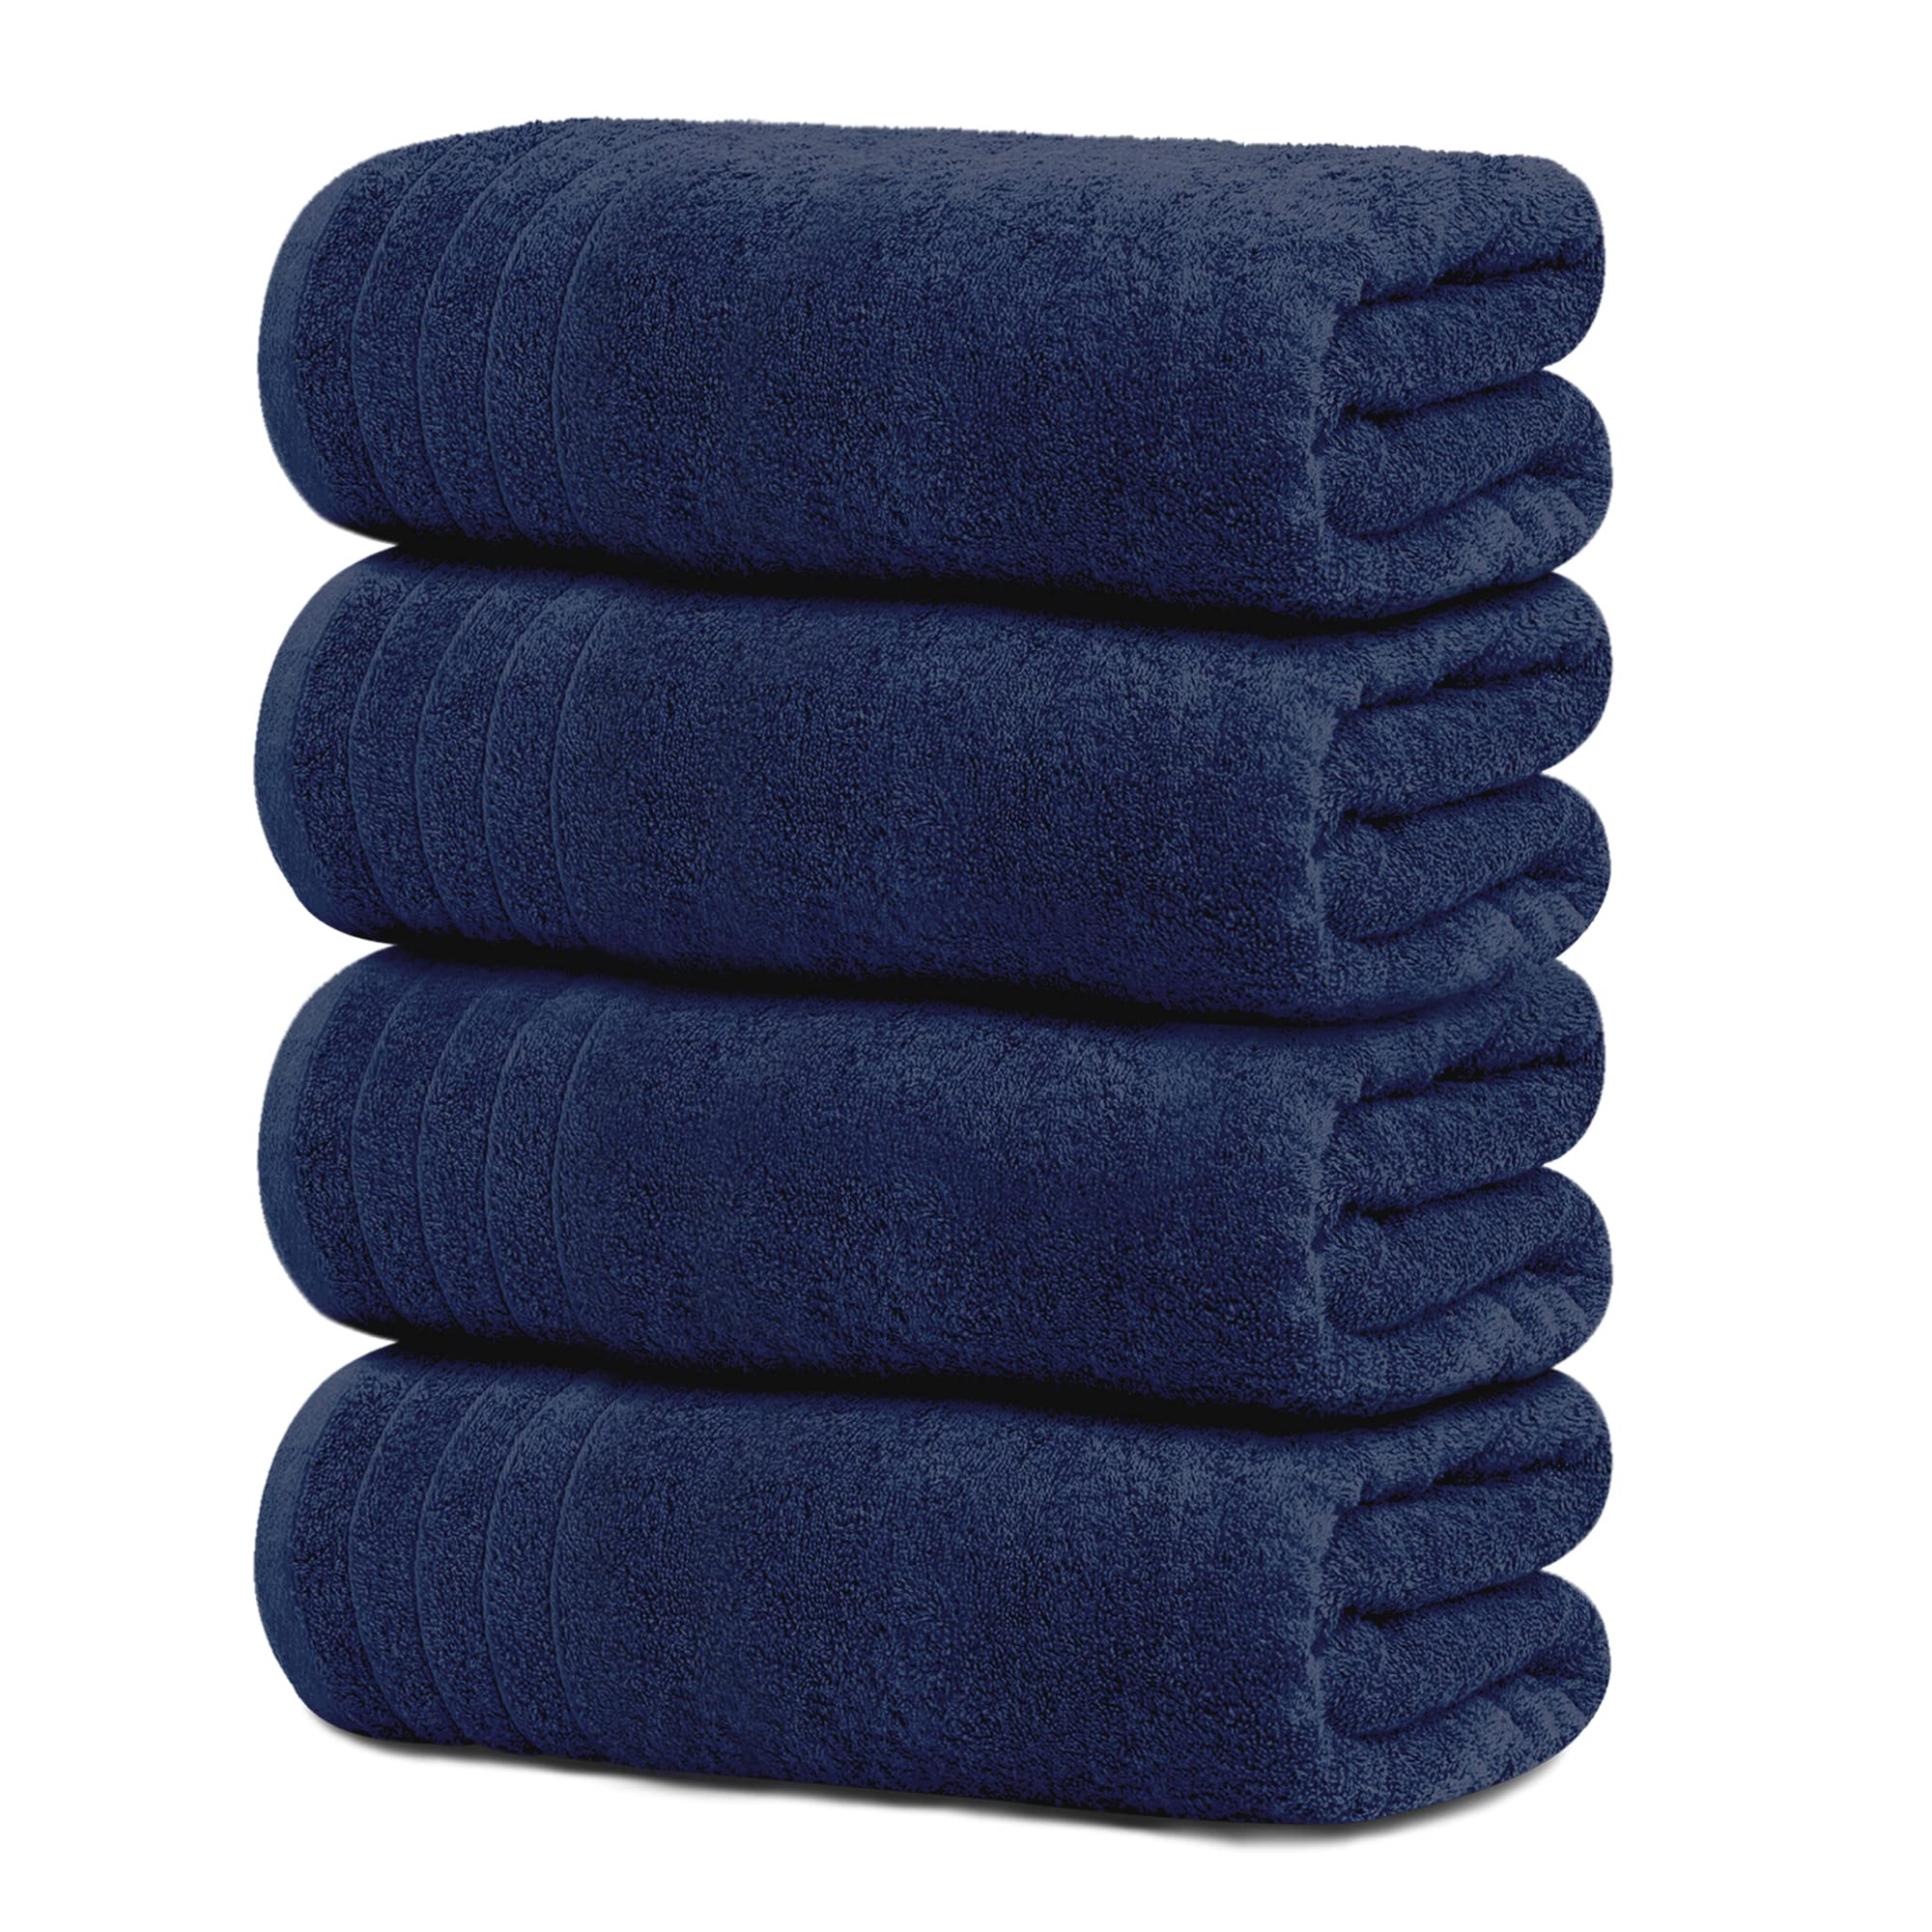 Tens Towels Large Bath Towels, 100% Cotton Towels, 30 x 60 Inches, Extra  Large Bath Towels, Lighter Weight & Super Absorbent, Quick Dry, Perfect  Bathroom Towels for Daily Use 4PK BATH TOWELS SET Navy